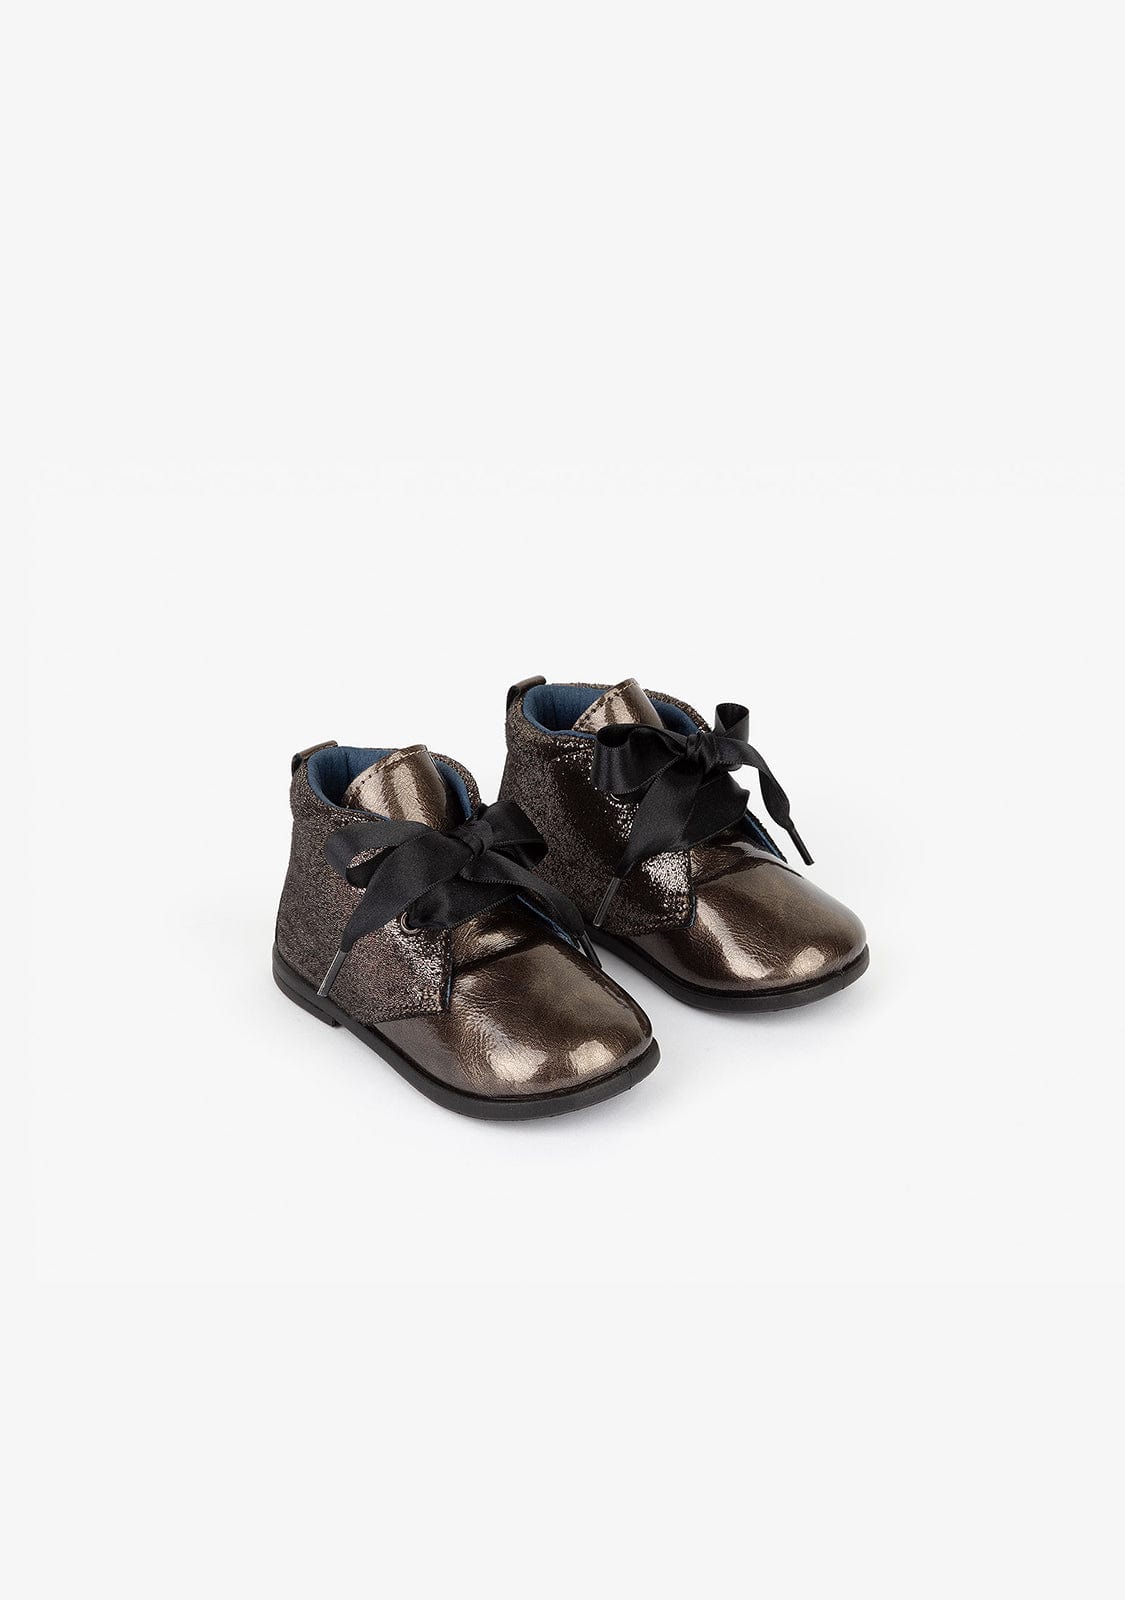 OSITO Shoes Baby's Titanium Patent Leather Booties